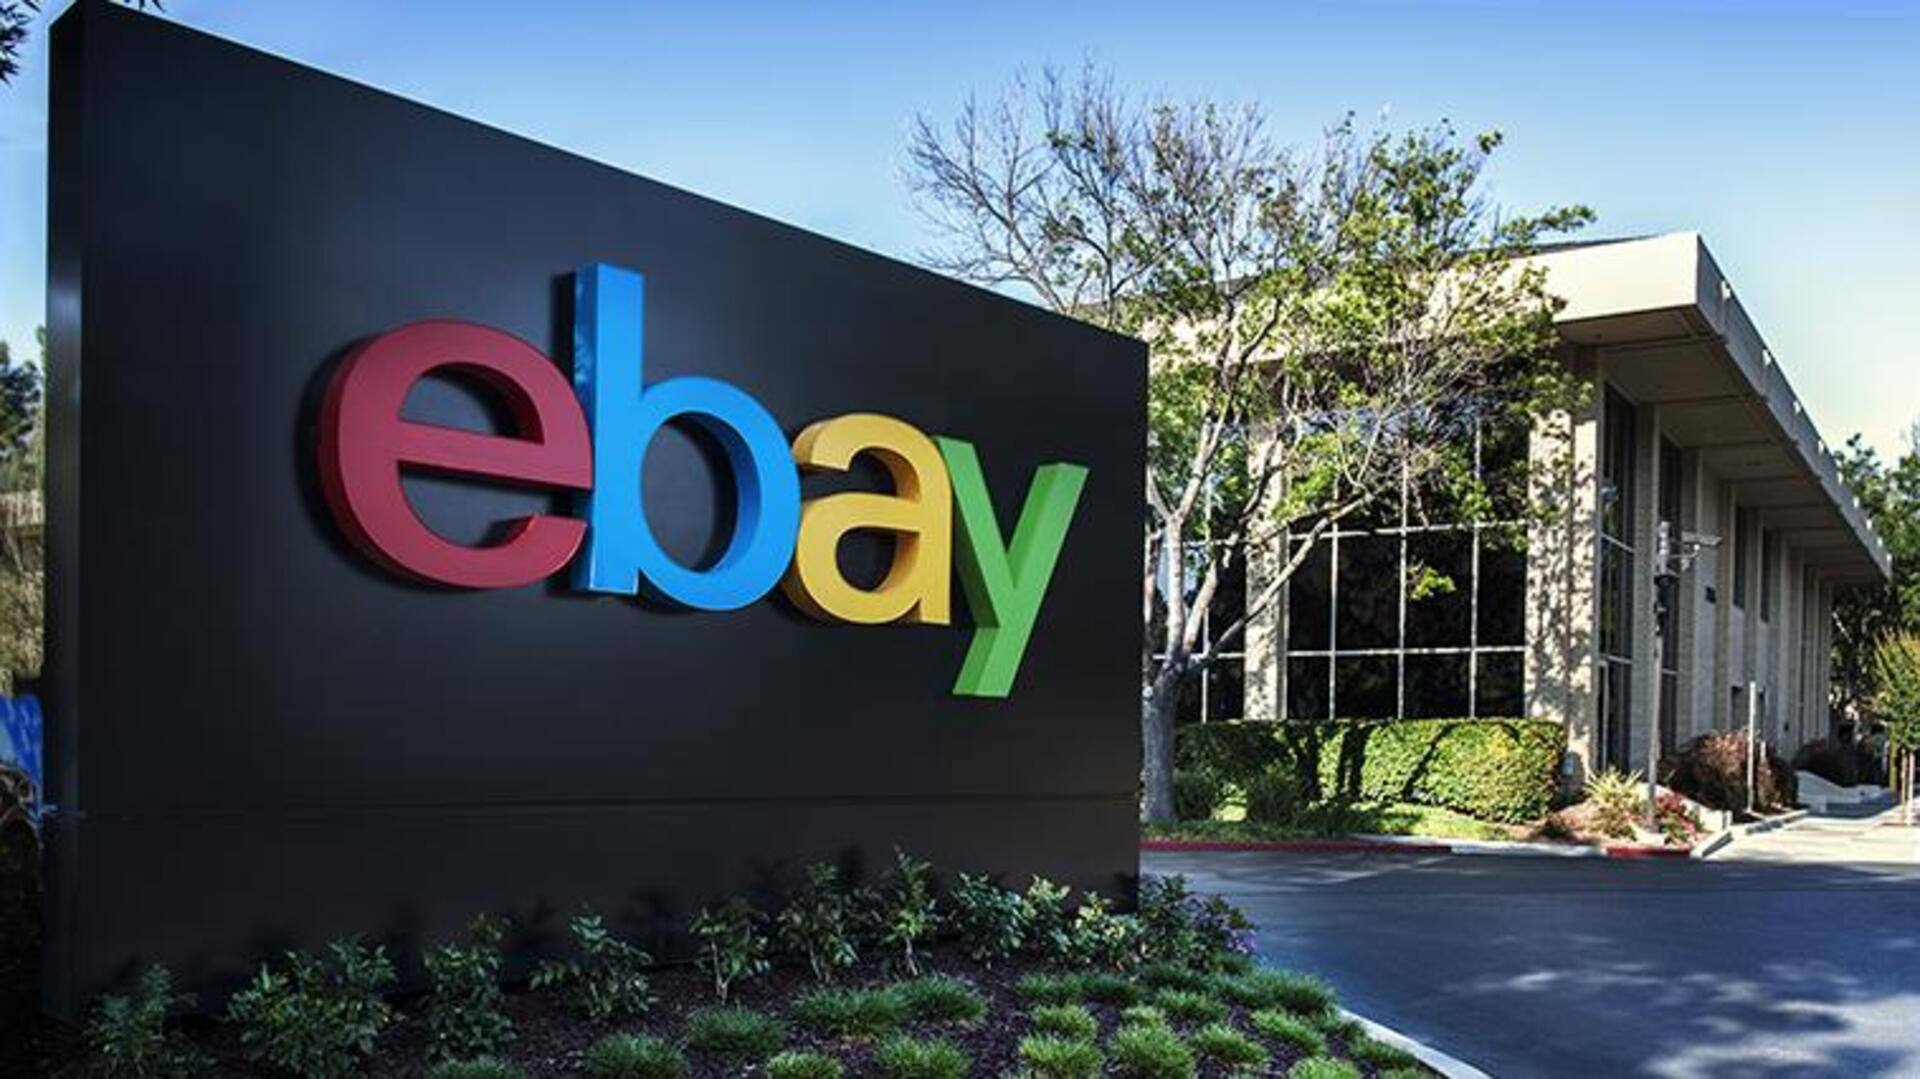 eBay to cut 1,000 jobs as expenses outpace revenue growth